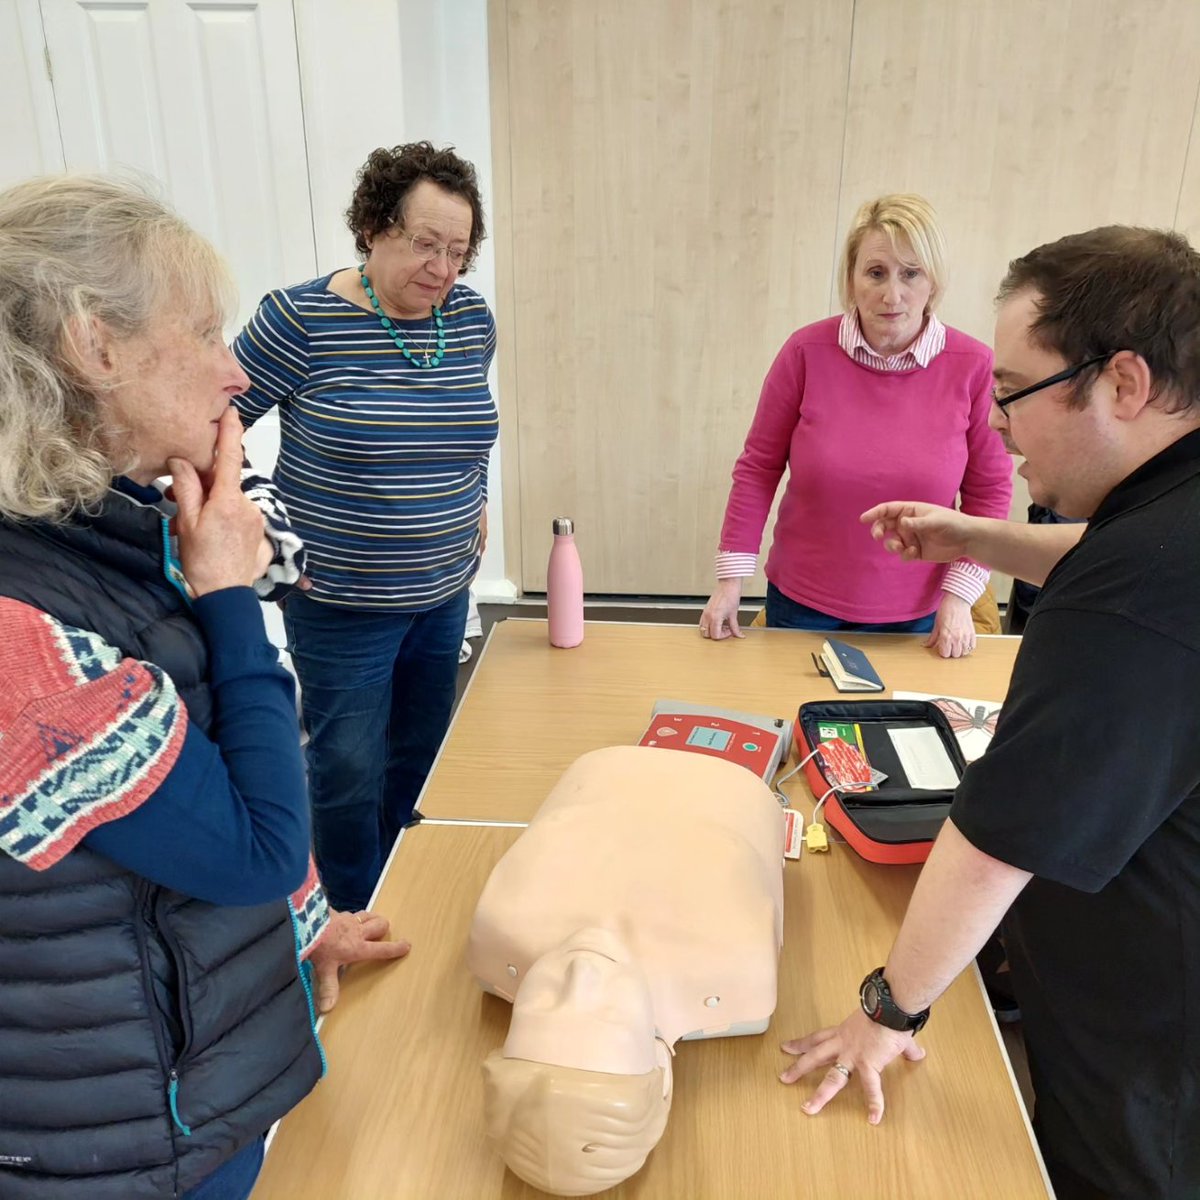 Yesterday, volunteers from across @SuffolkFamilies took part in a First Aid Awareness session at Hillside Community Centre @StowmarketTC. We offer free training to all volunteers @SuffolkFamilies. If you'd like to find out more about volunteer opportunities, please get in touch!